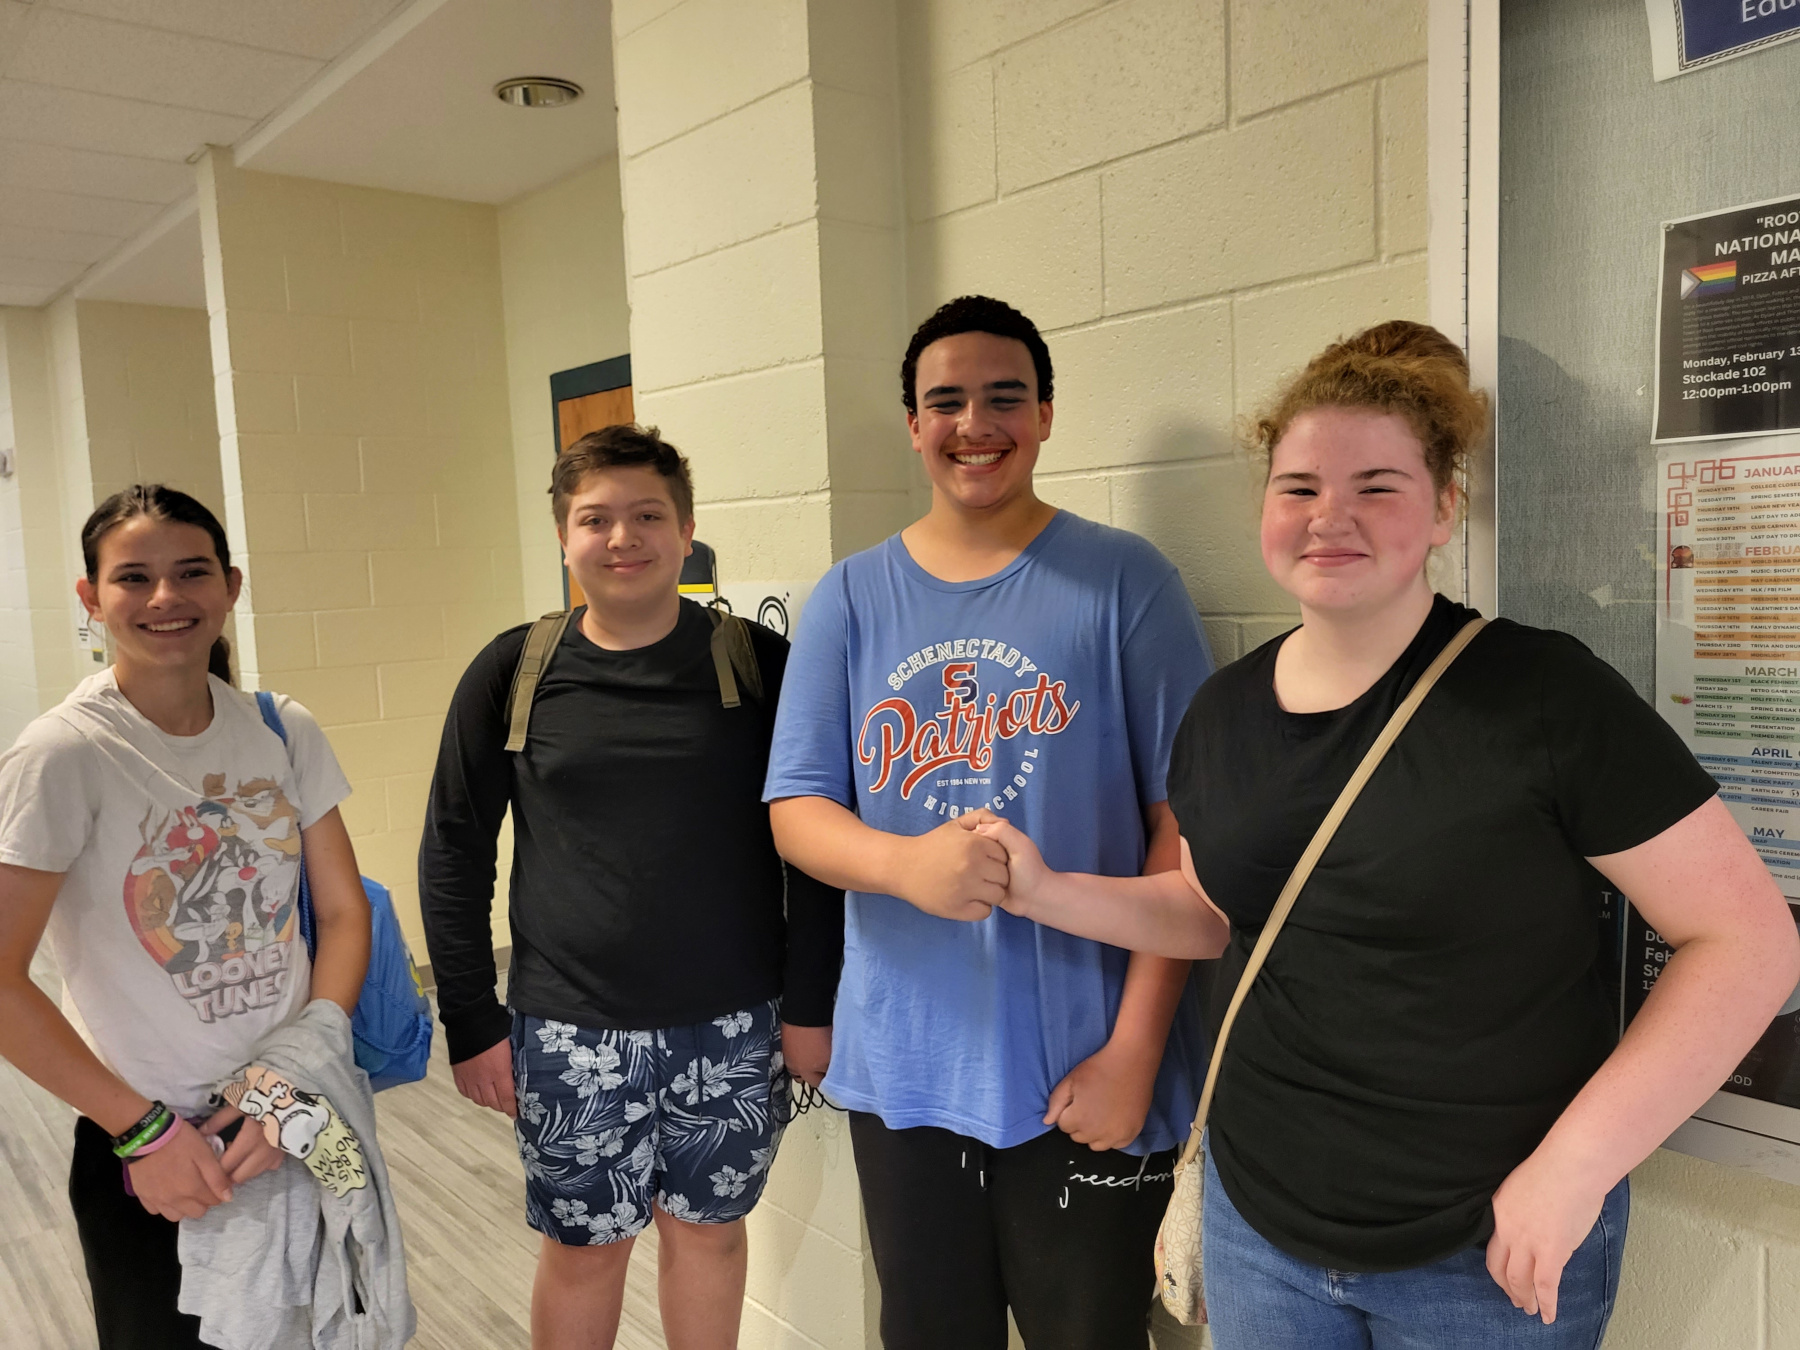 Four students, smiling, standing in hallway